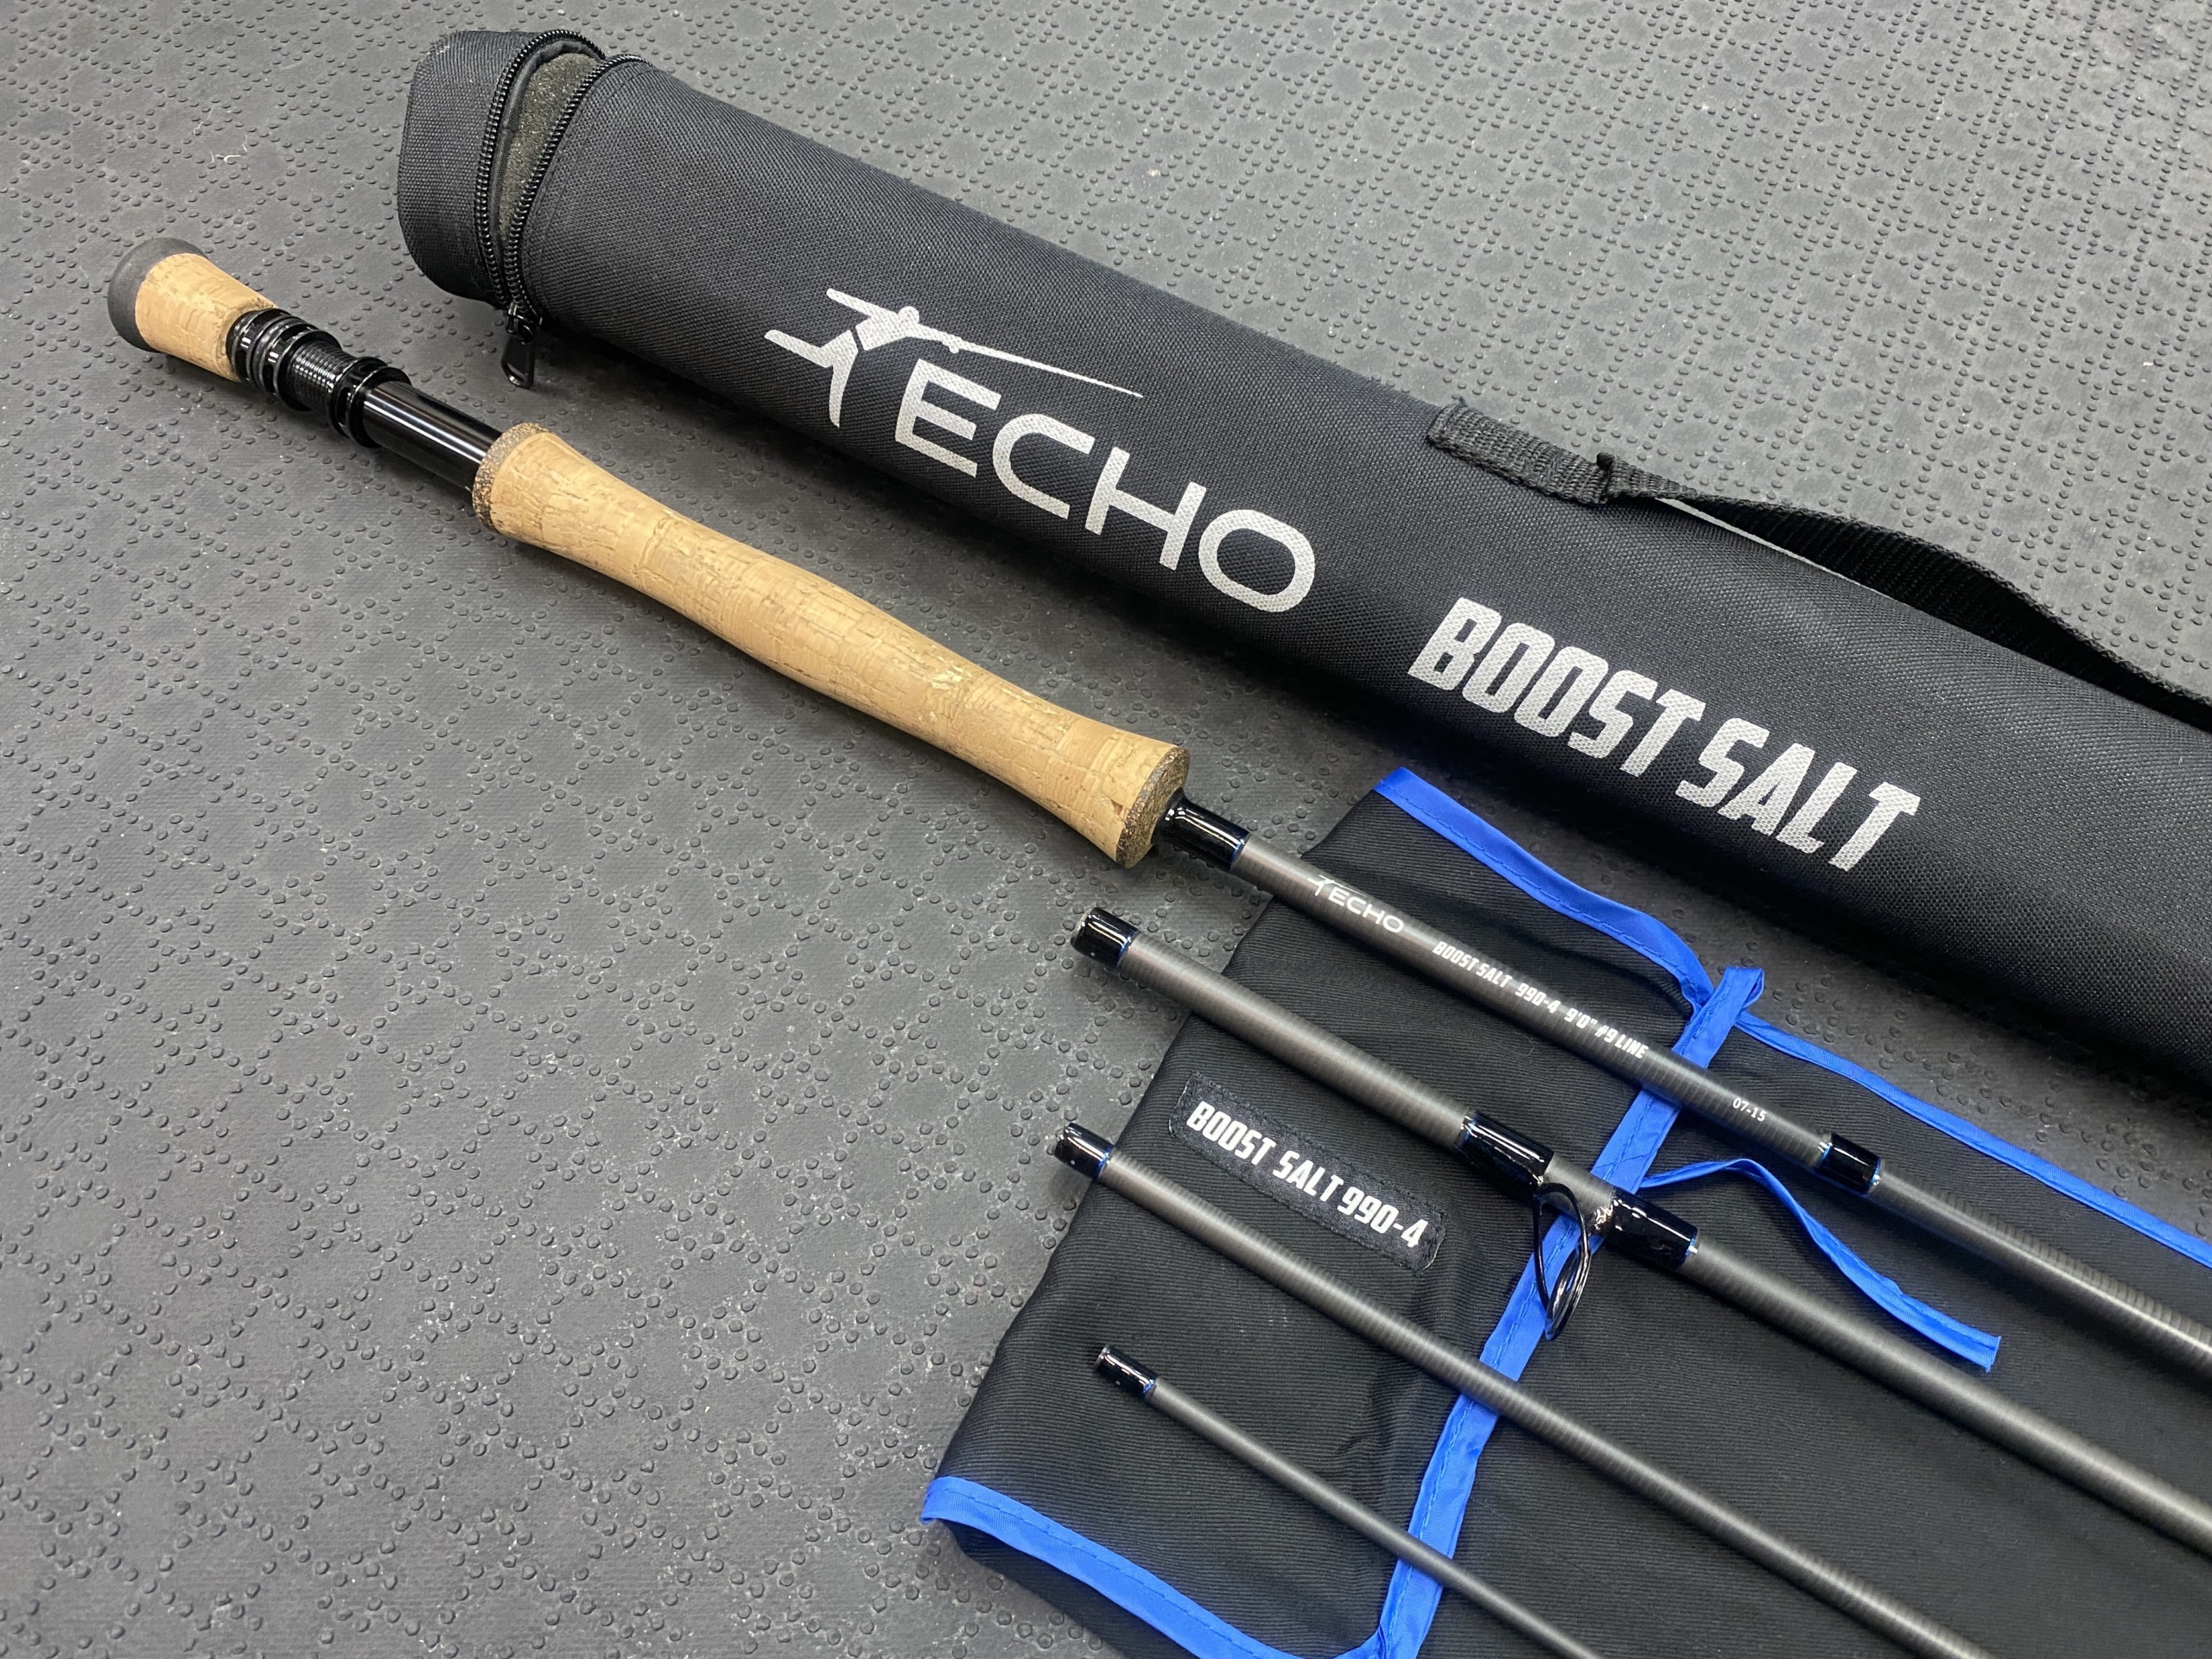 SOLD! – Echo – Boost Salt – 990-4 – 9′ – 9Wt – 4Pc Fly Rod – LIKE NEW! –  $200 – The First Cast – Hook, Line and Sinker's Fly Fishing Shop